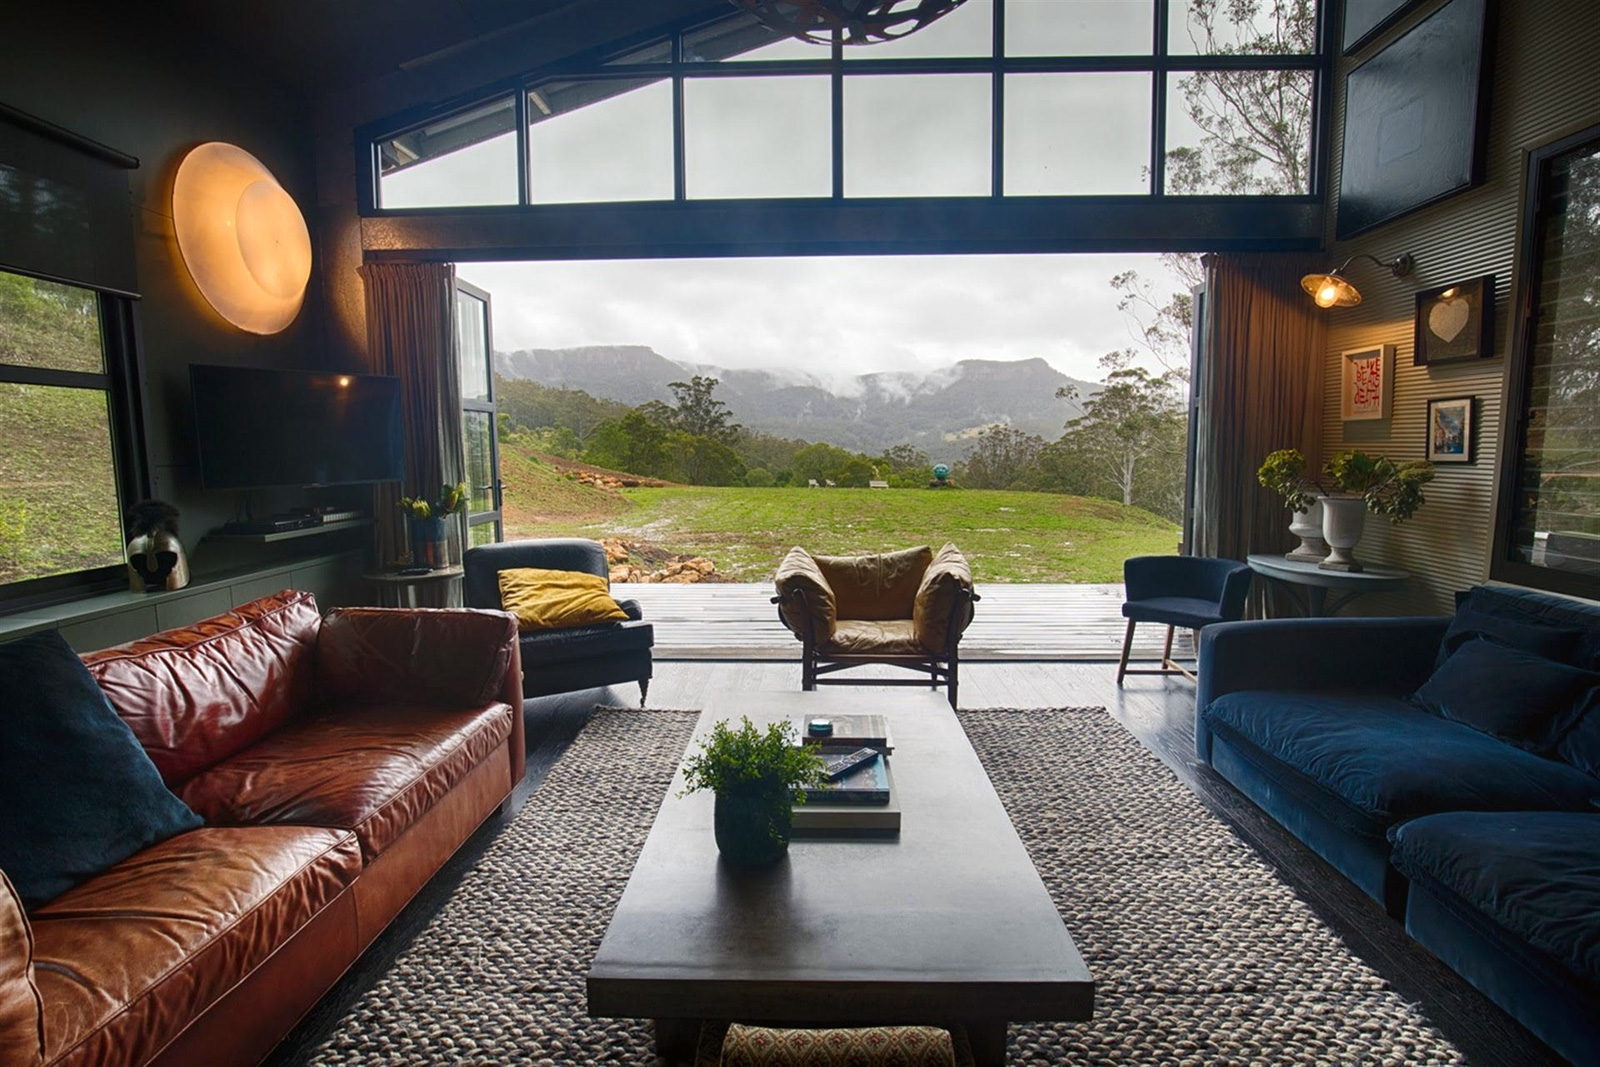 Black Star Barn captures mountain views in New South Wales